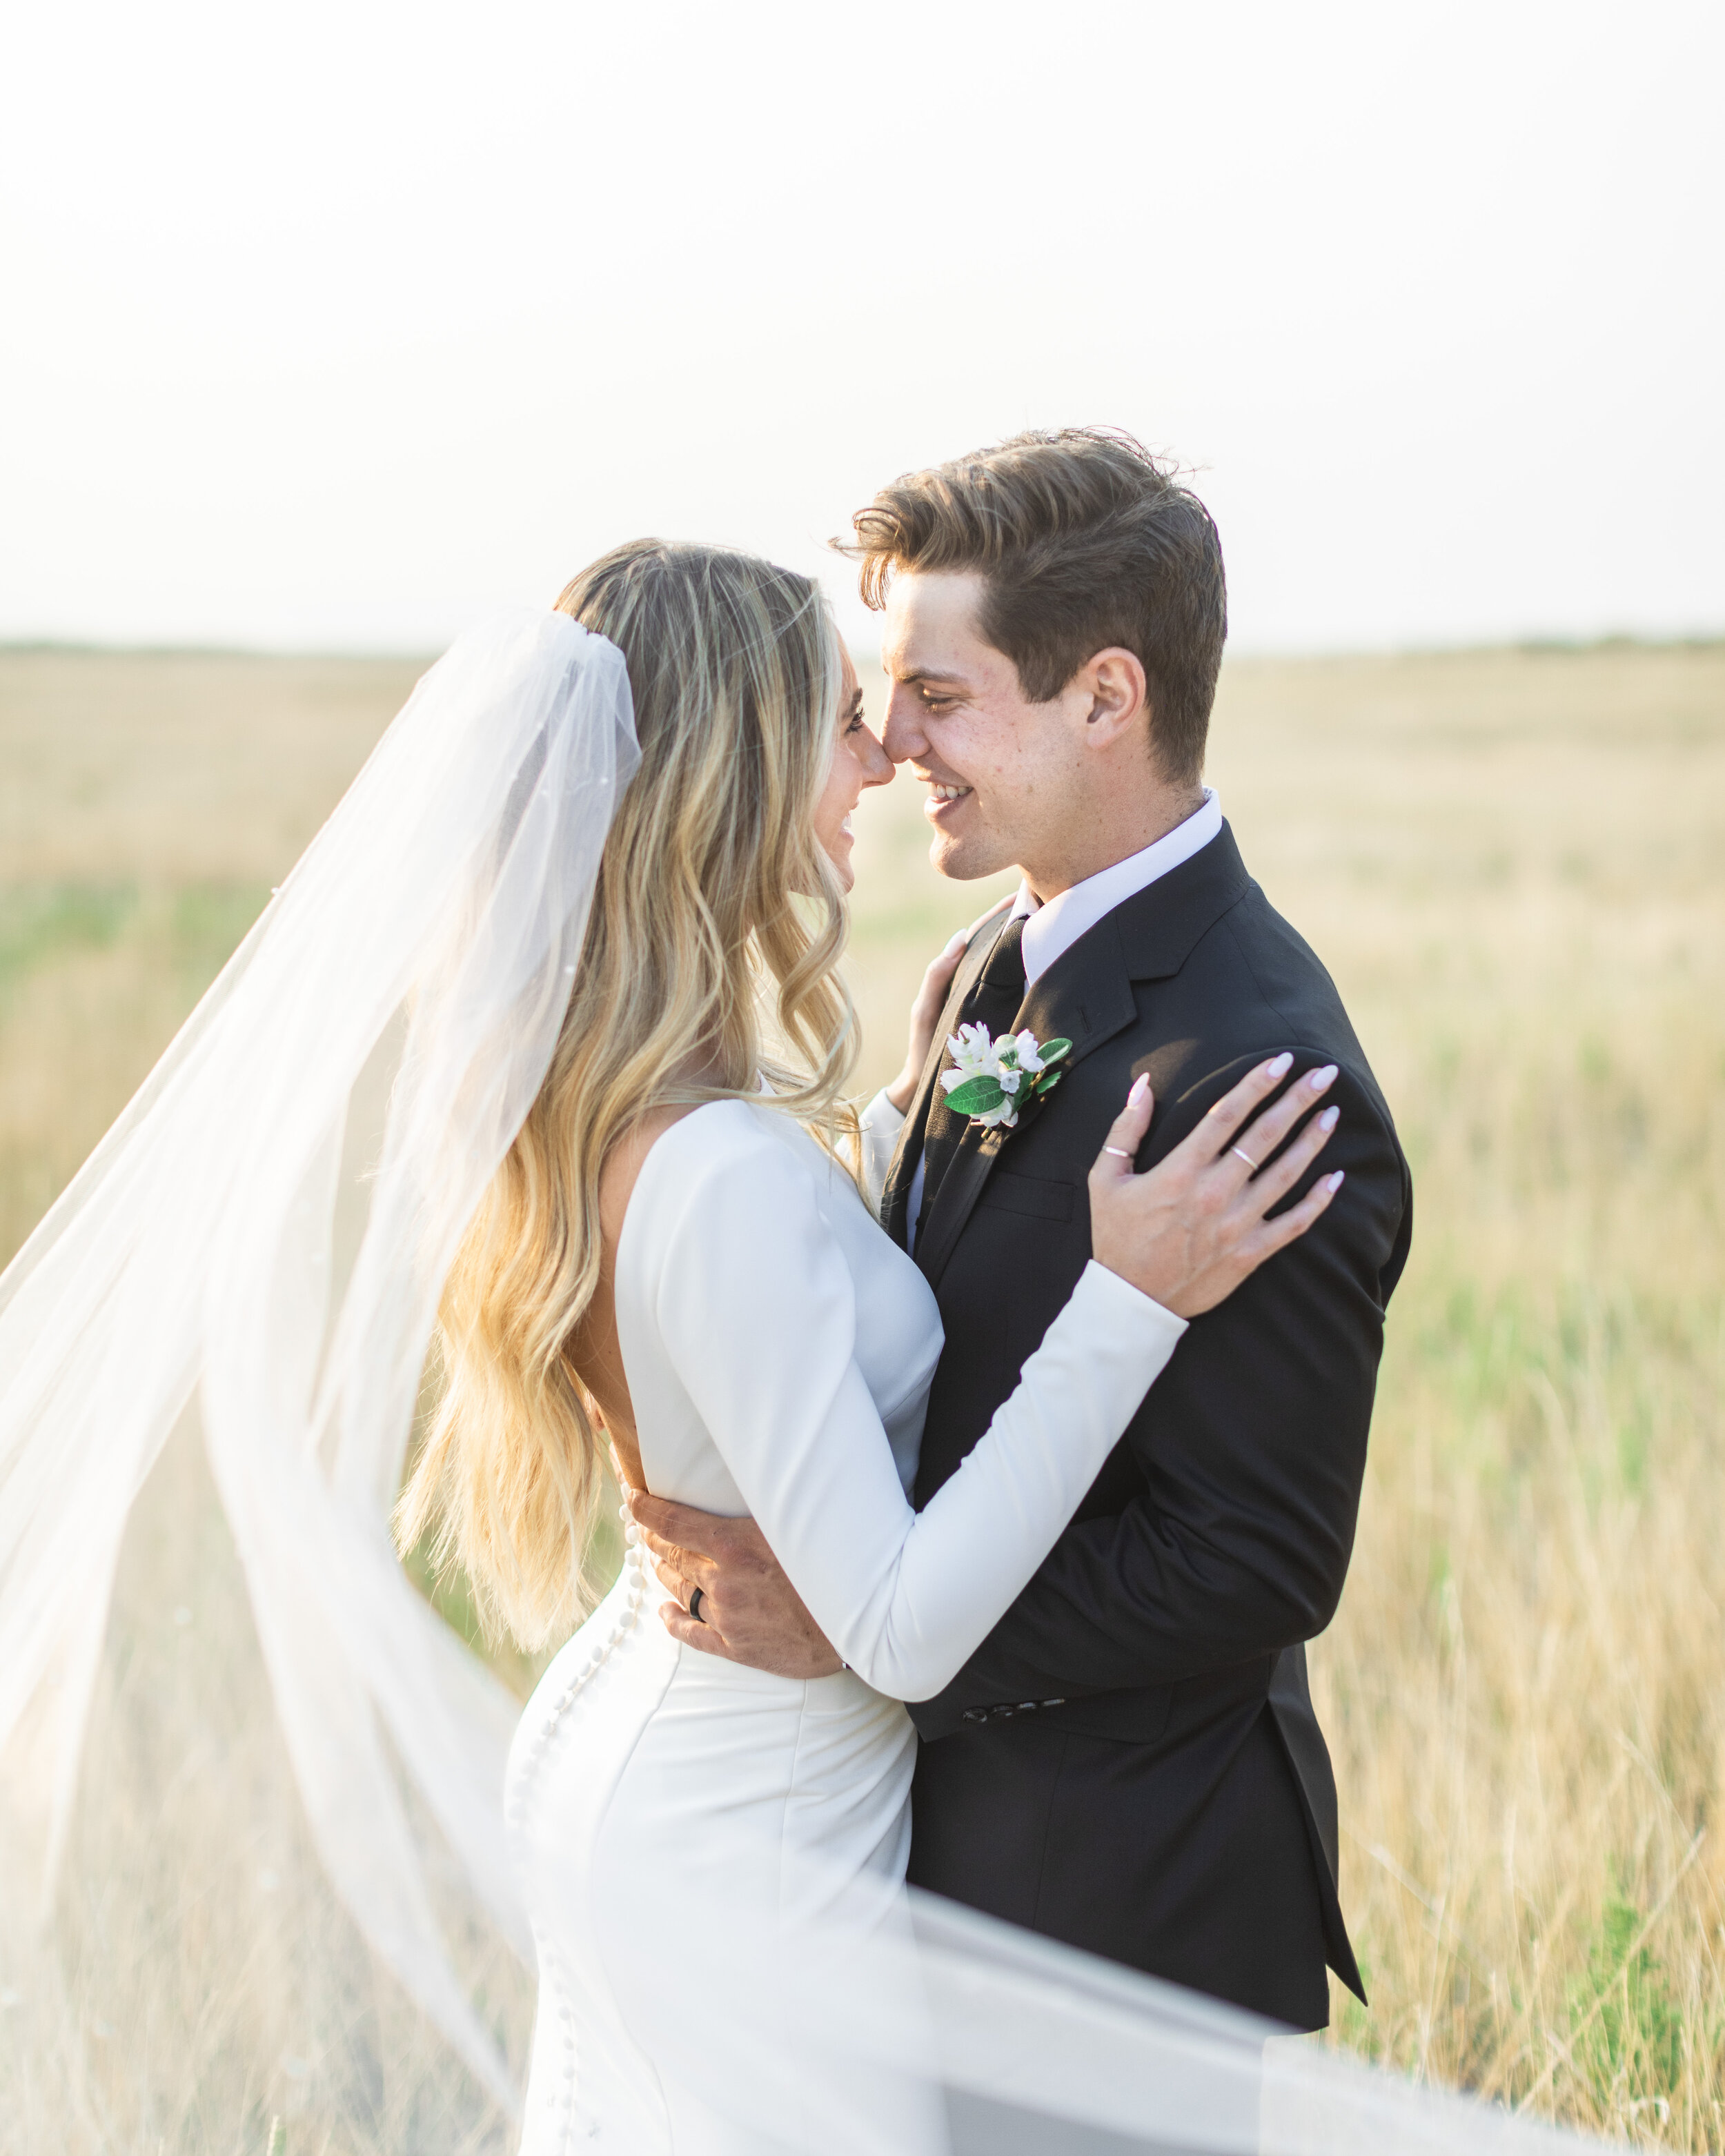  A newly wed couple touch noses at sunset with golden light by Savanna Richardson Photography a Salt Lake City Wedding Photographer. open back wedding dress with buttons down the back long blonde hair black tie #savannarichardsonphotography #savannaa